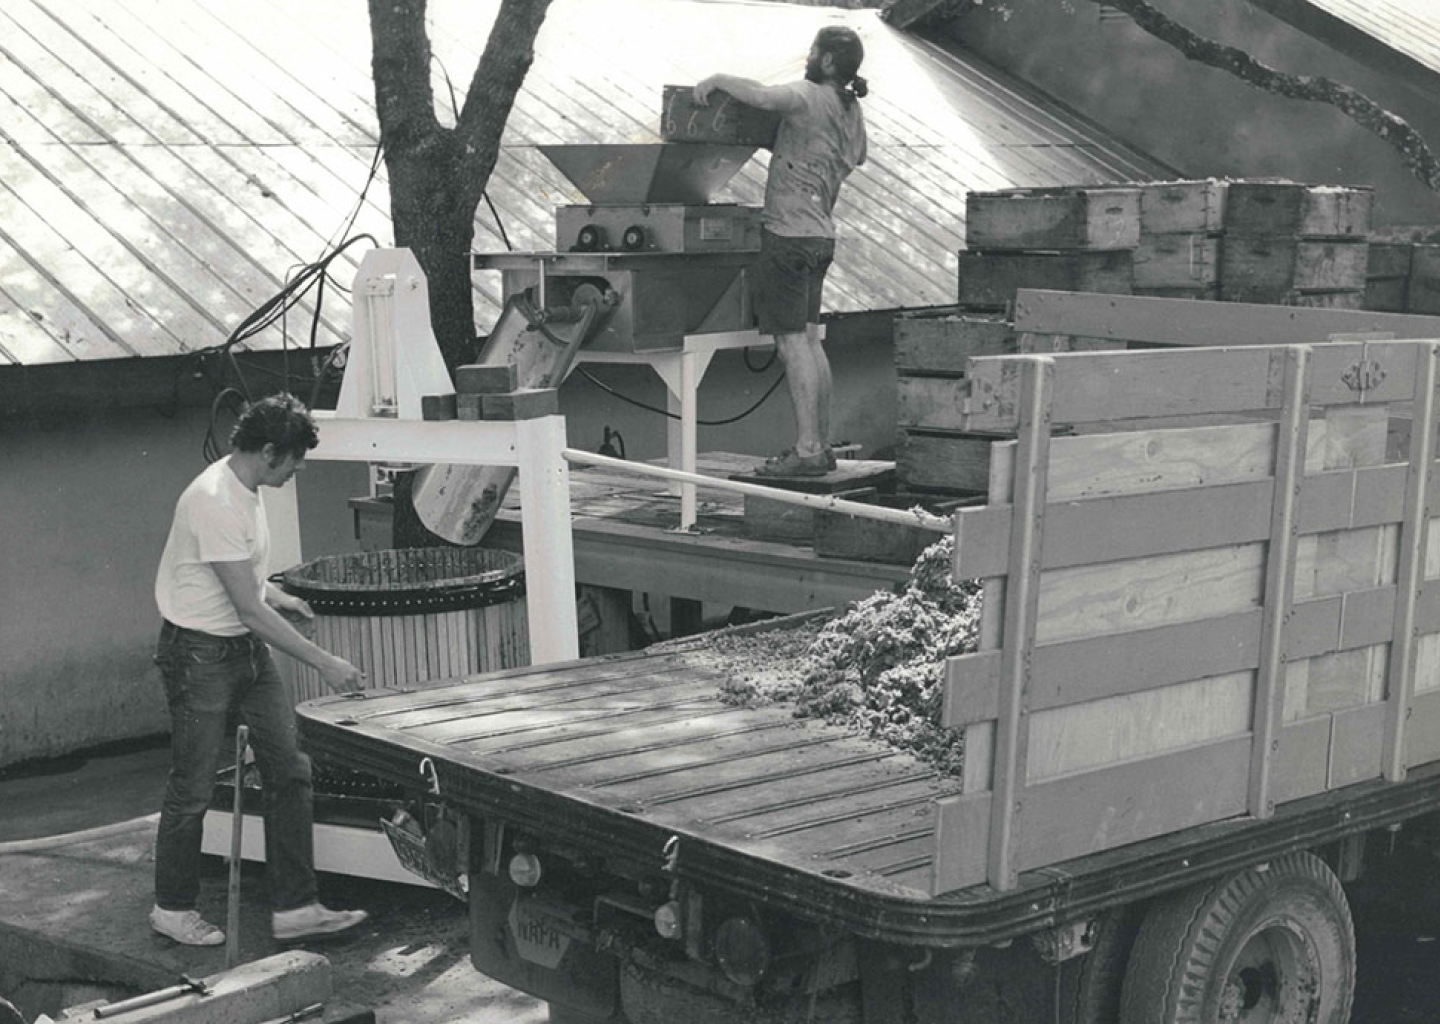 Two men using the grape press, and unloading grapes from a truck from the harvest.